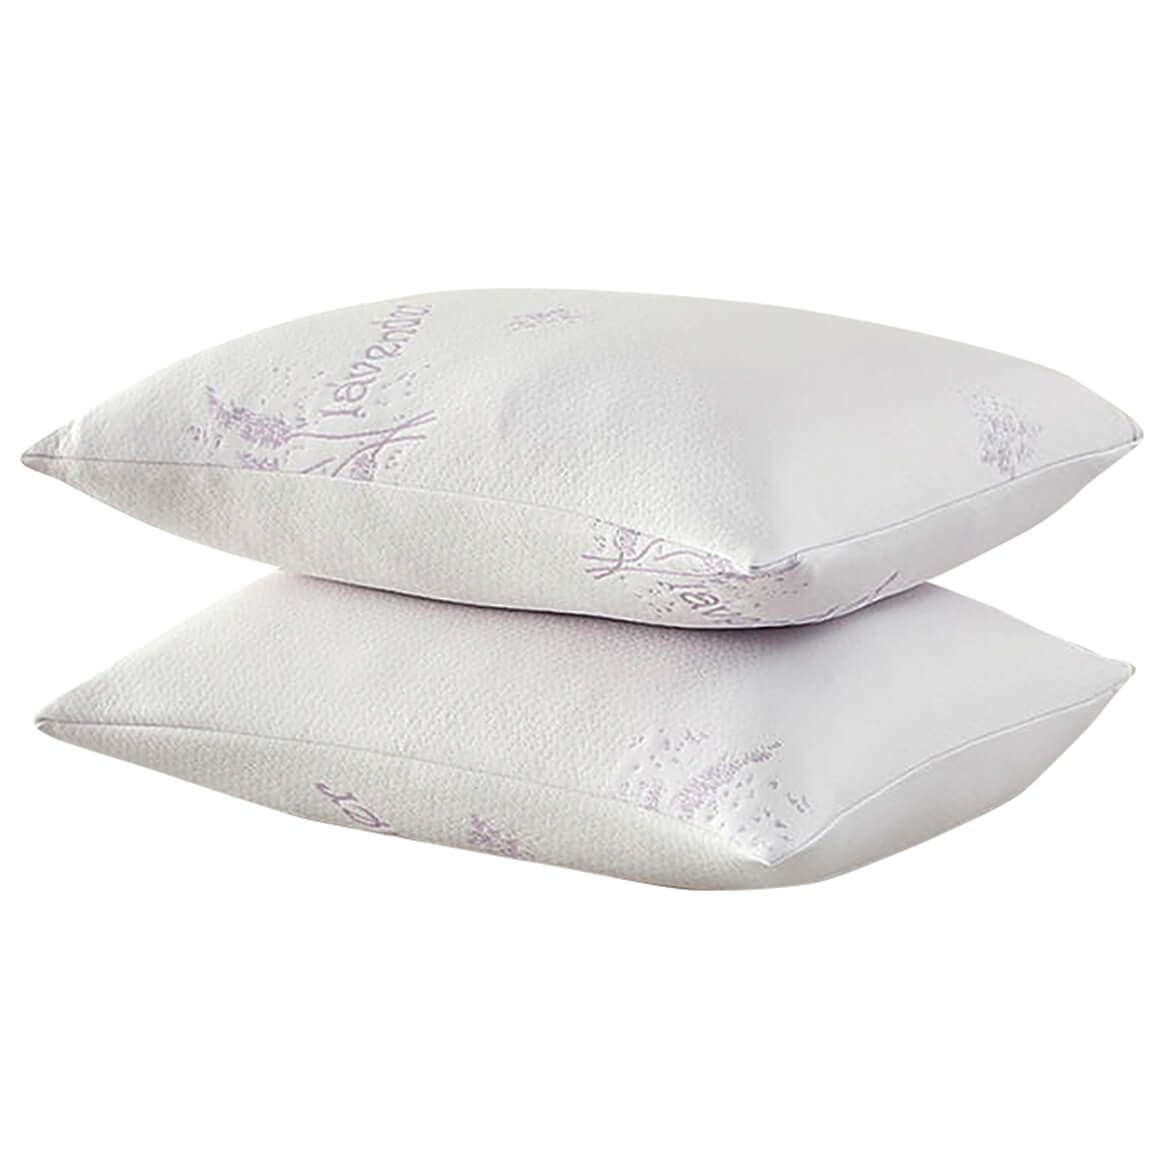 Lavender Scented Pillow Covers by OakRidge™, Set of 2 + '-' + 374632